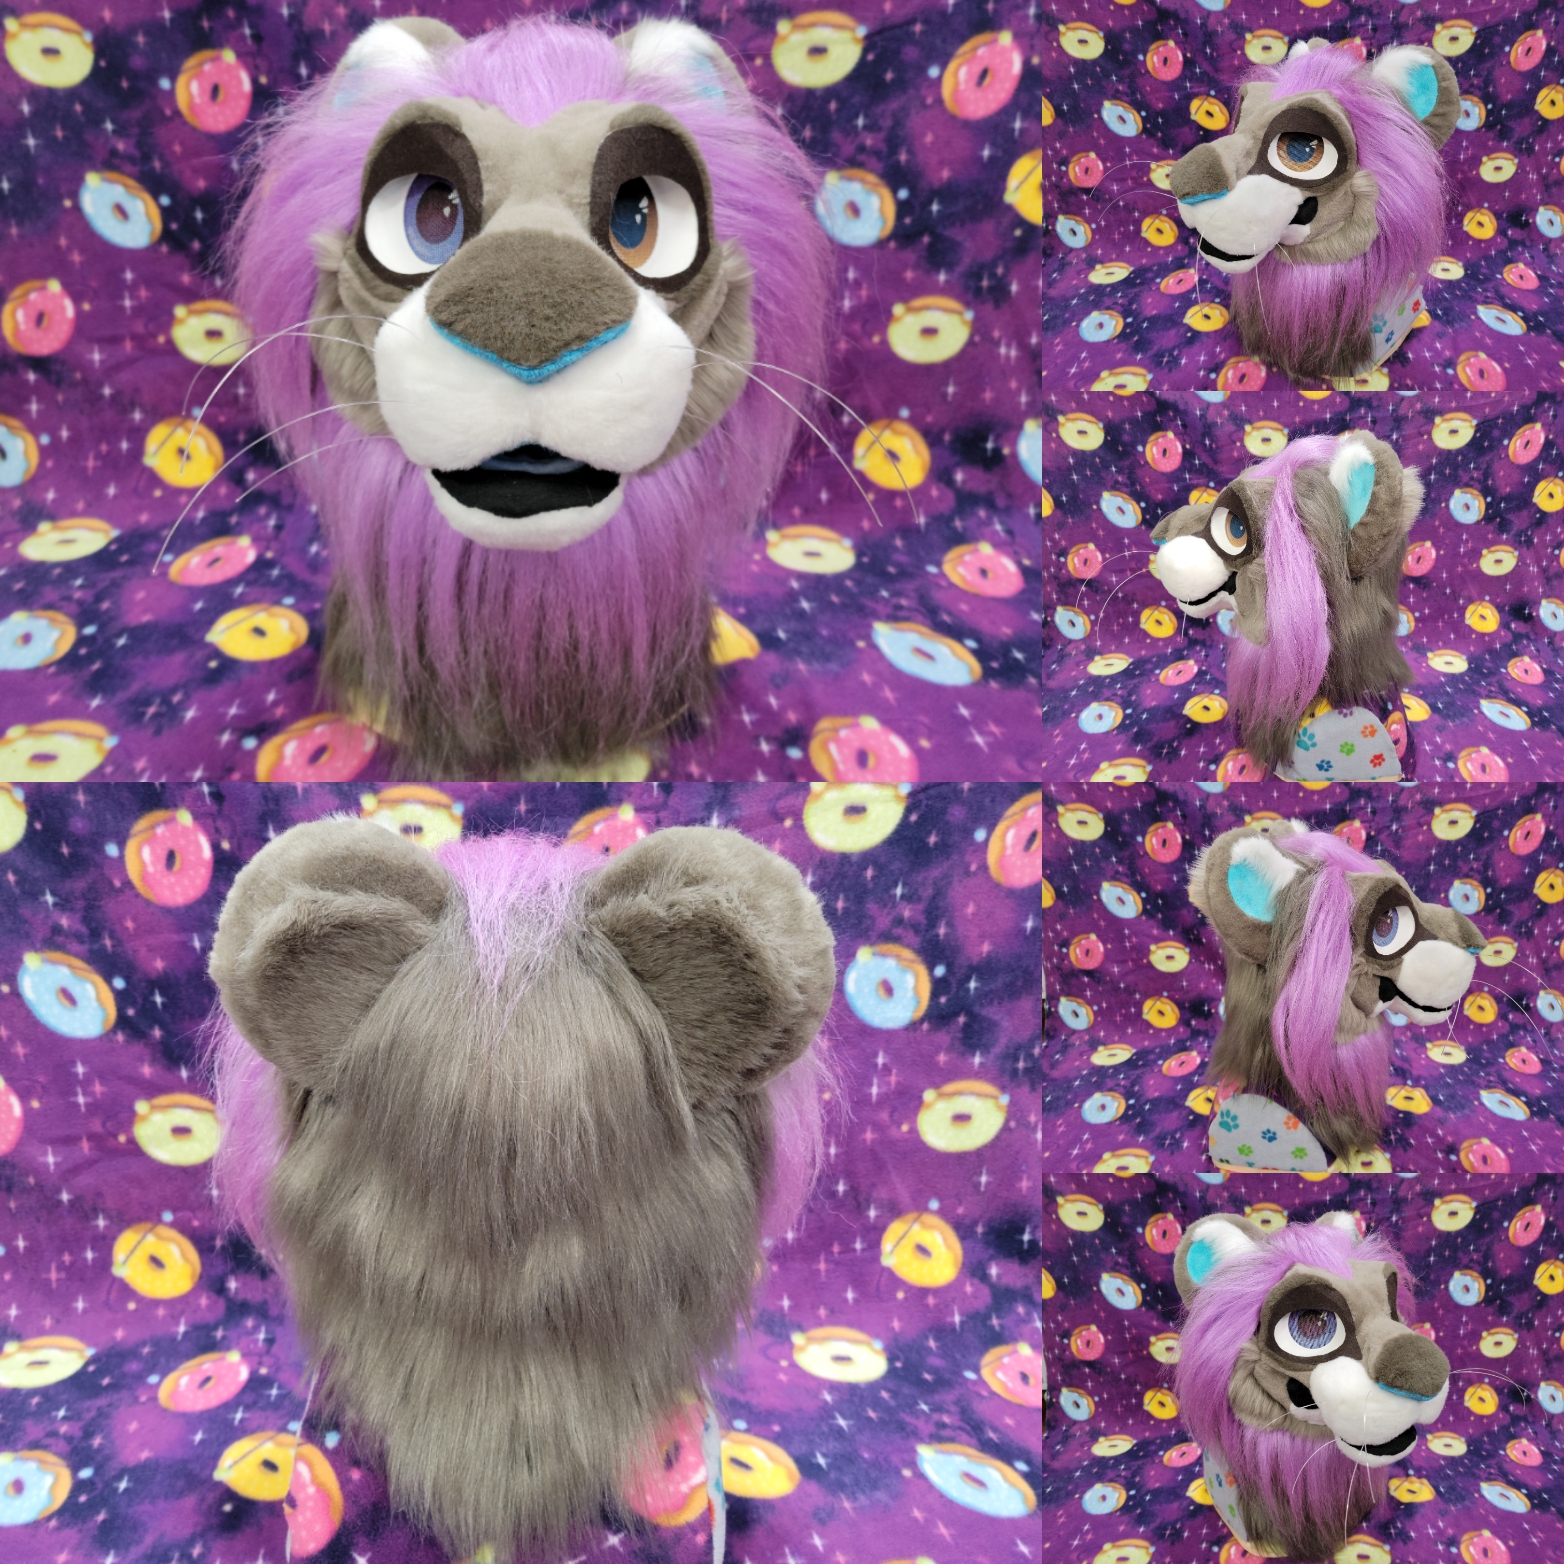 A grey, violet and white cartoon lion head is depicted with purple and brown eyes and white eye frames. They have a purple tongue and are made on our big cat bases.